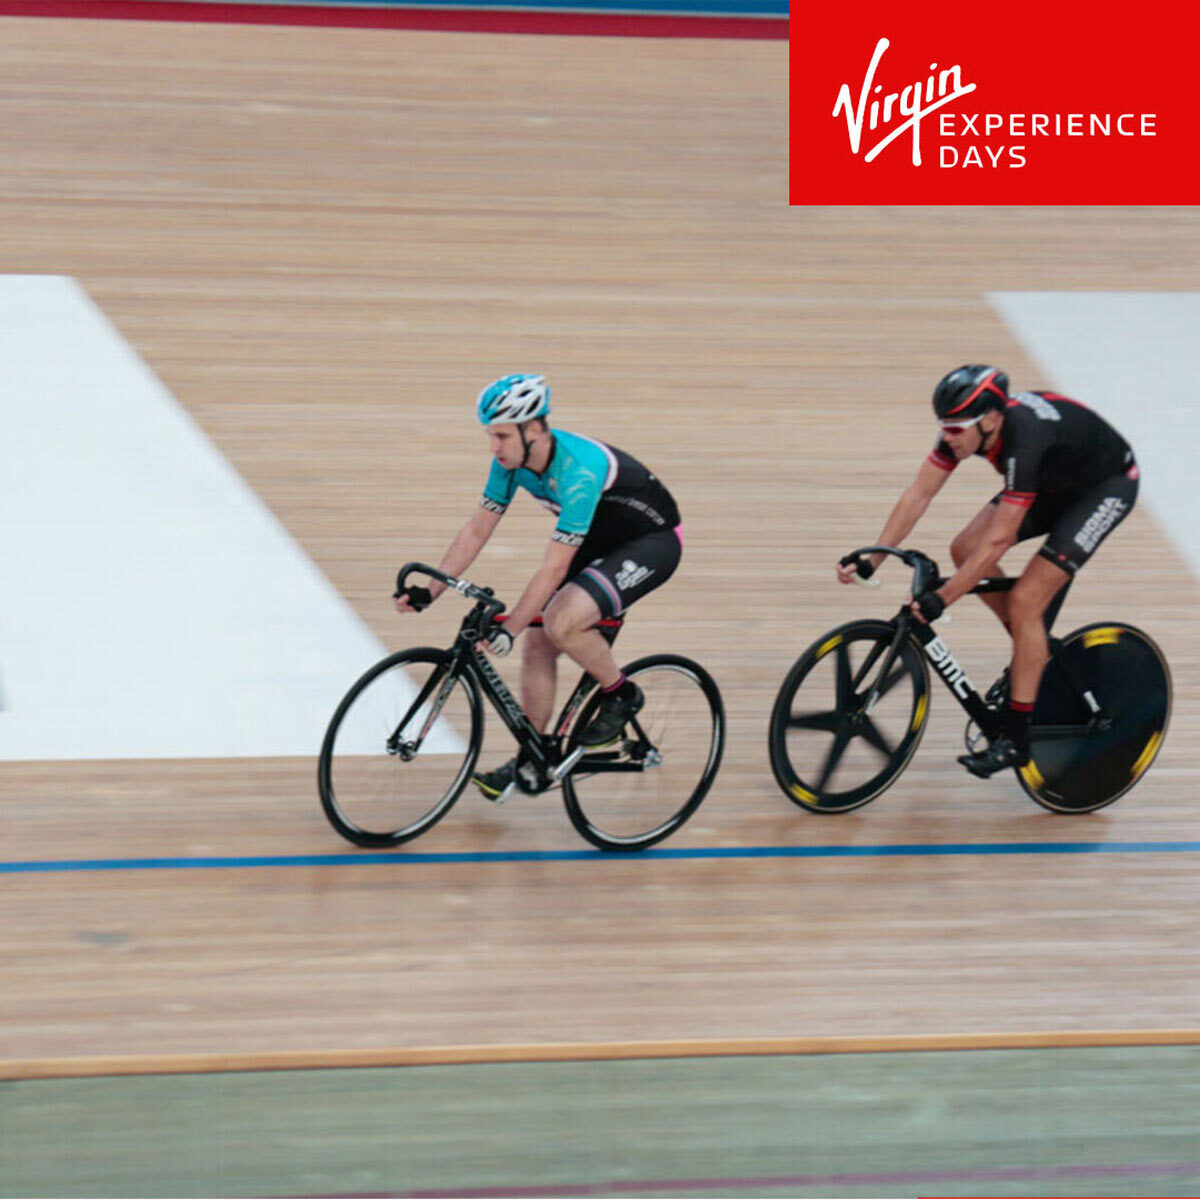 Buy Virgin Experience Velodrome Cycling Experience with GB Gold Medalist Image1 at Costco.co.uk